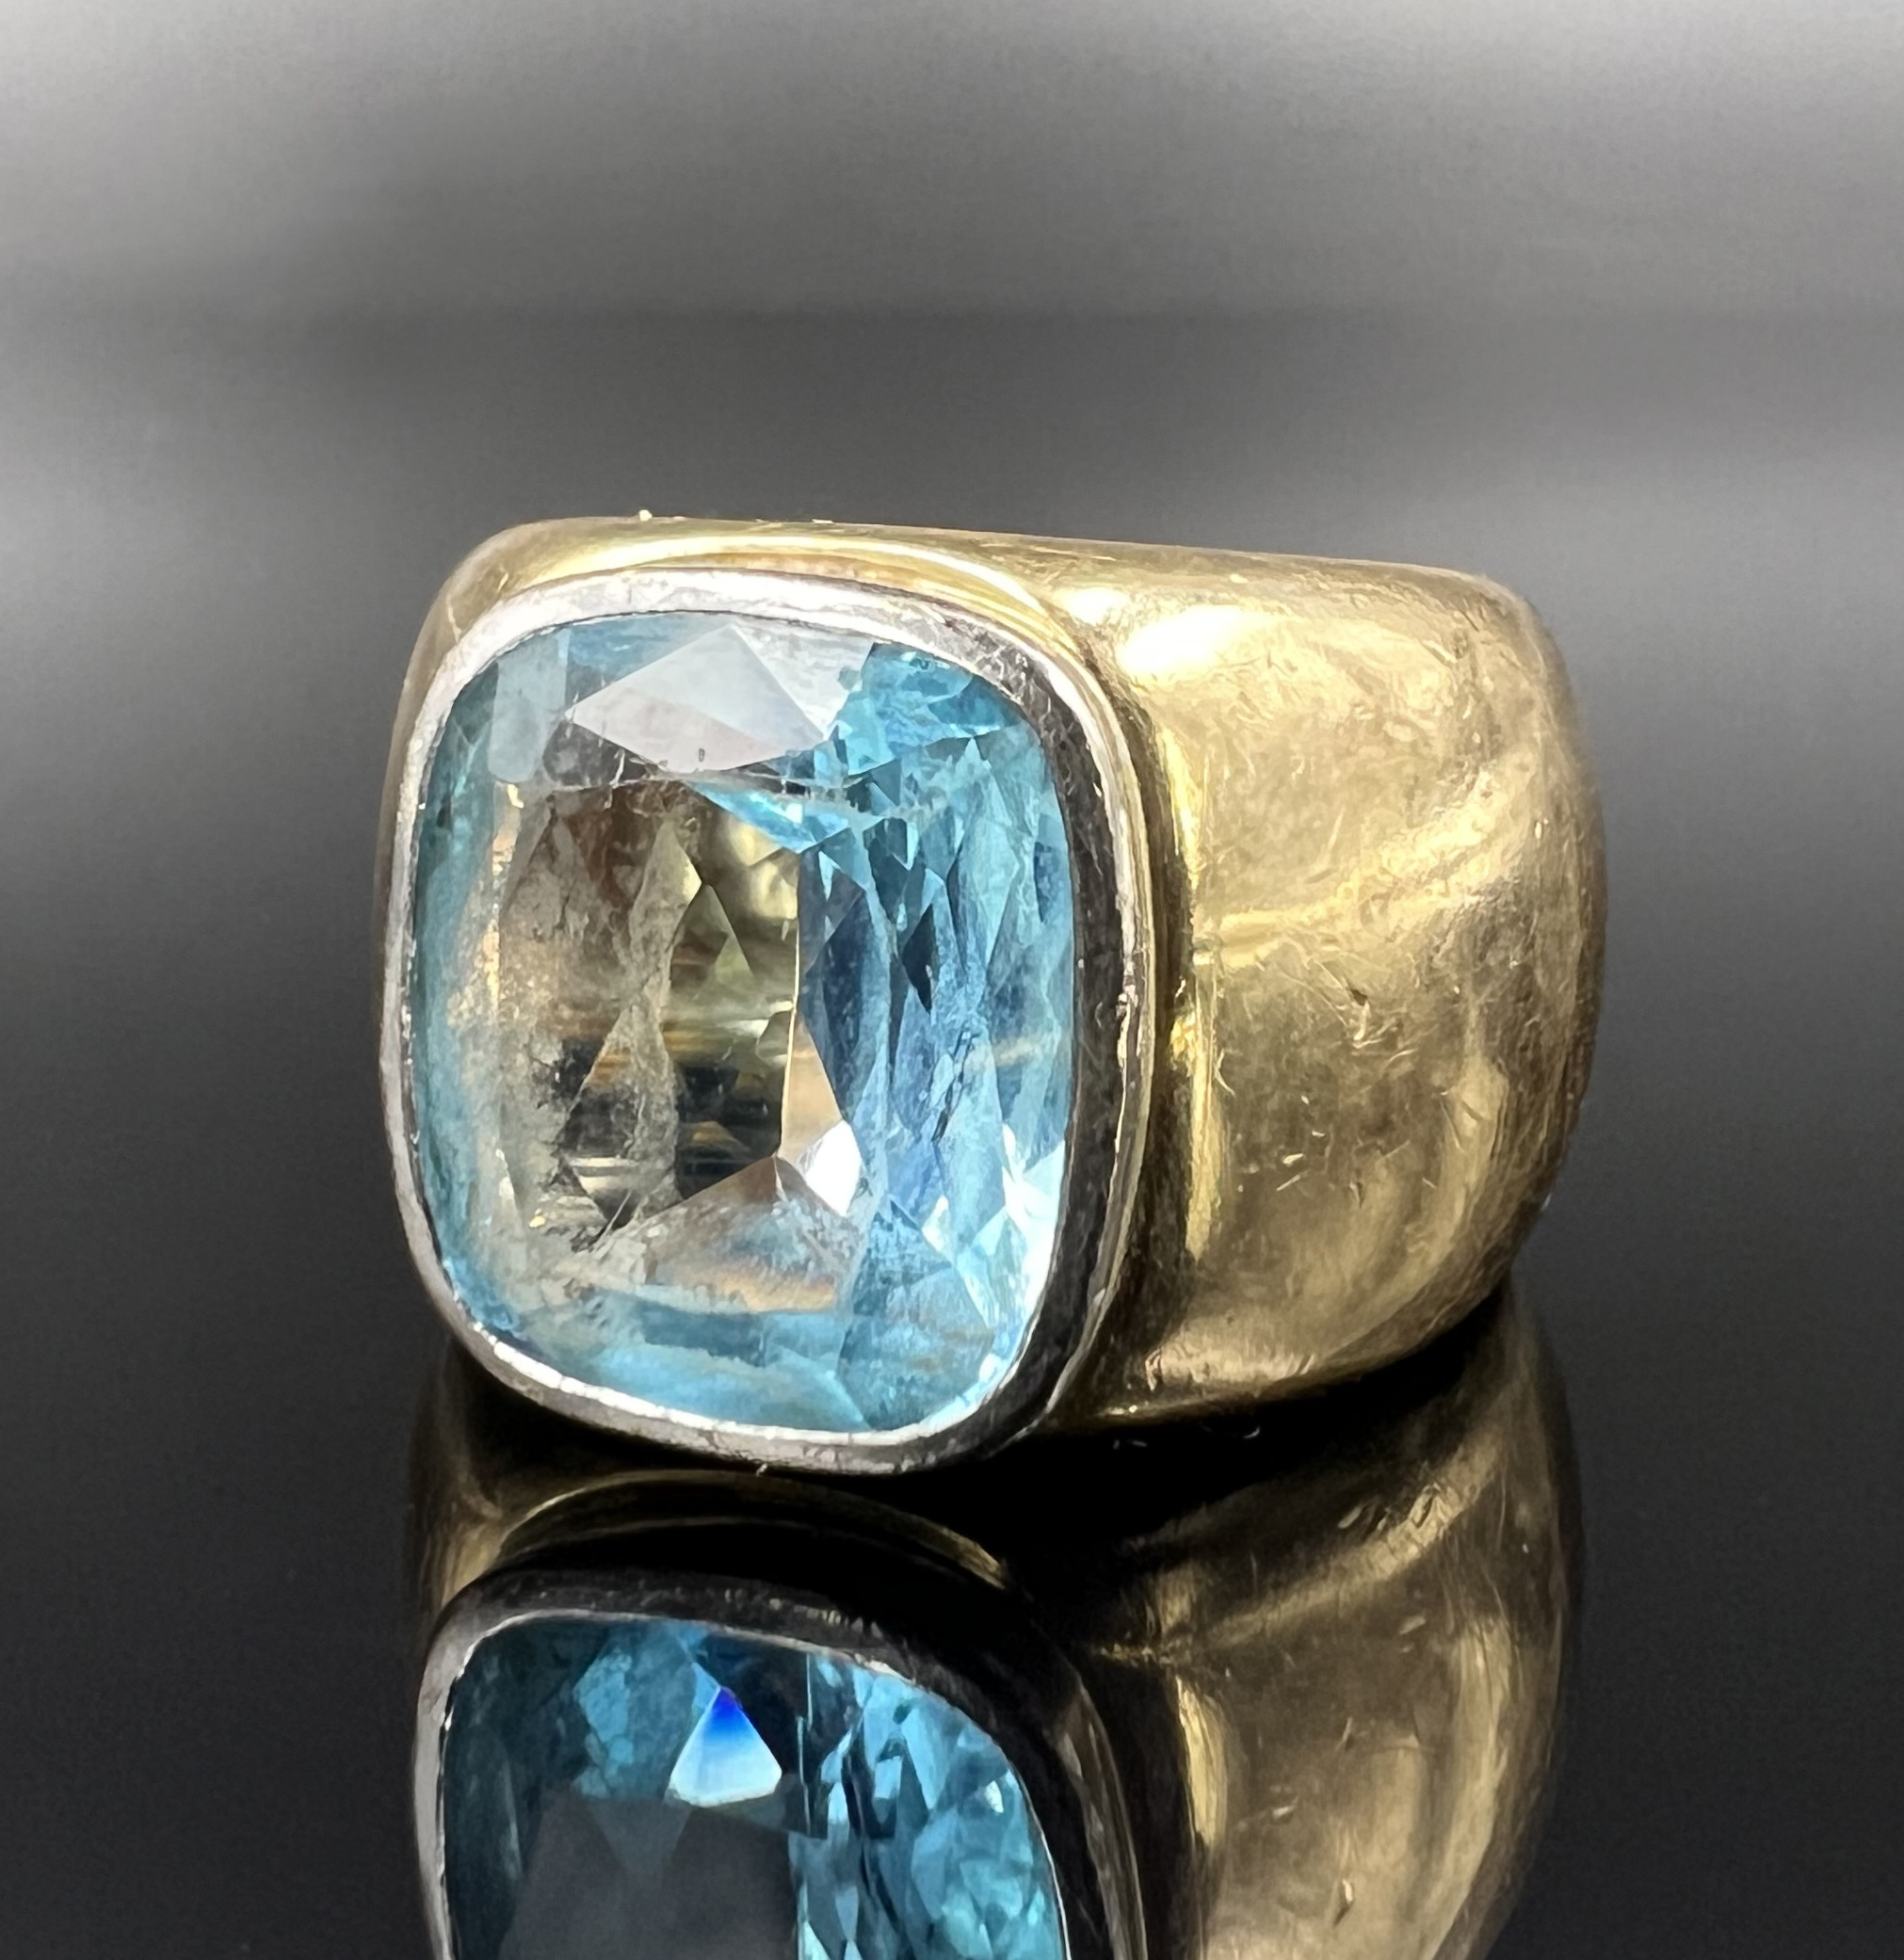 Ladies' ring. 585 yellow gold with an aquamarine-coloured gemstone.